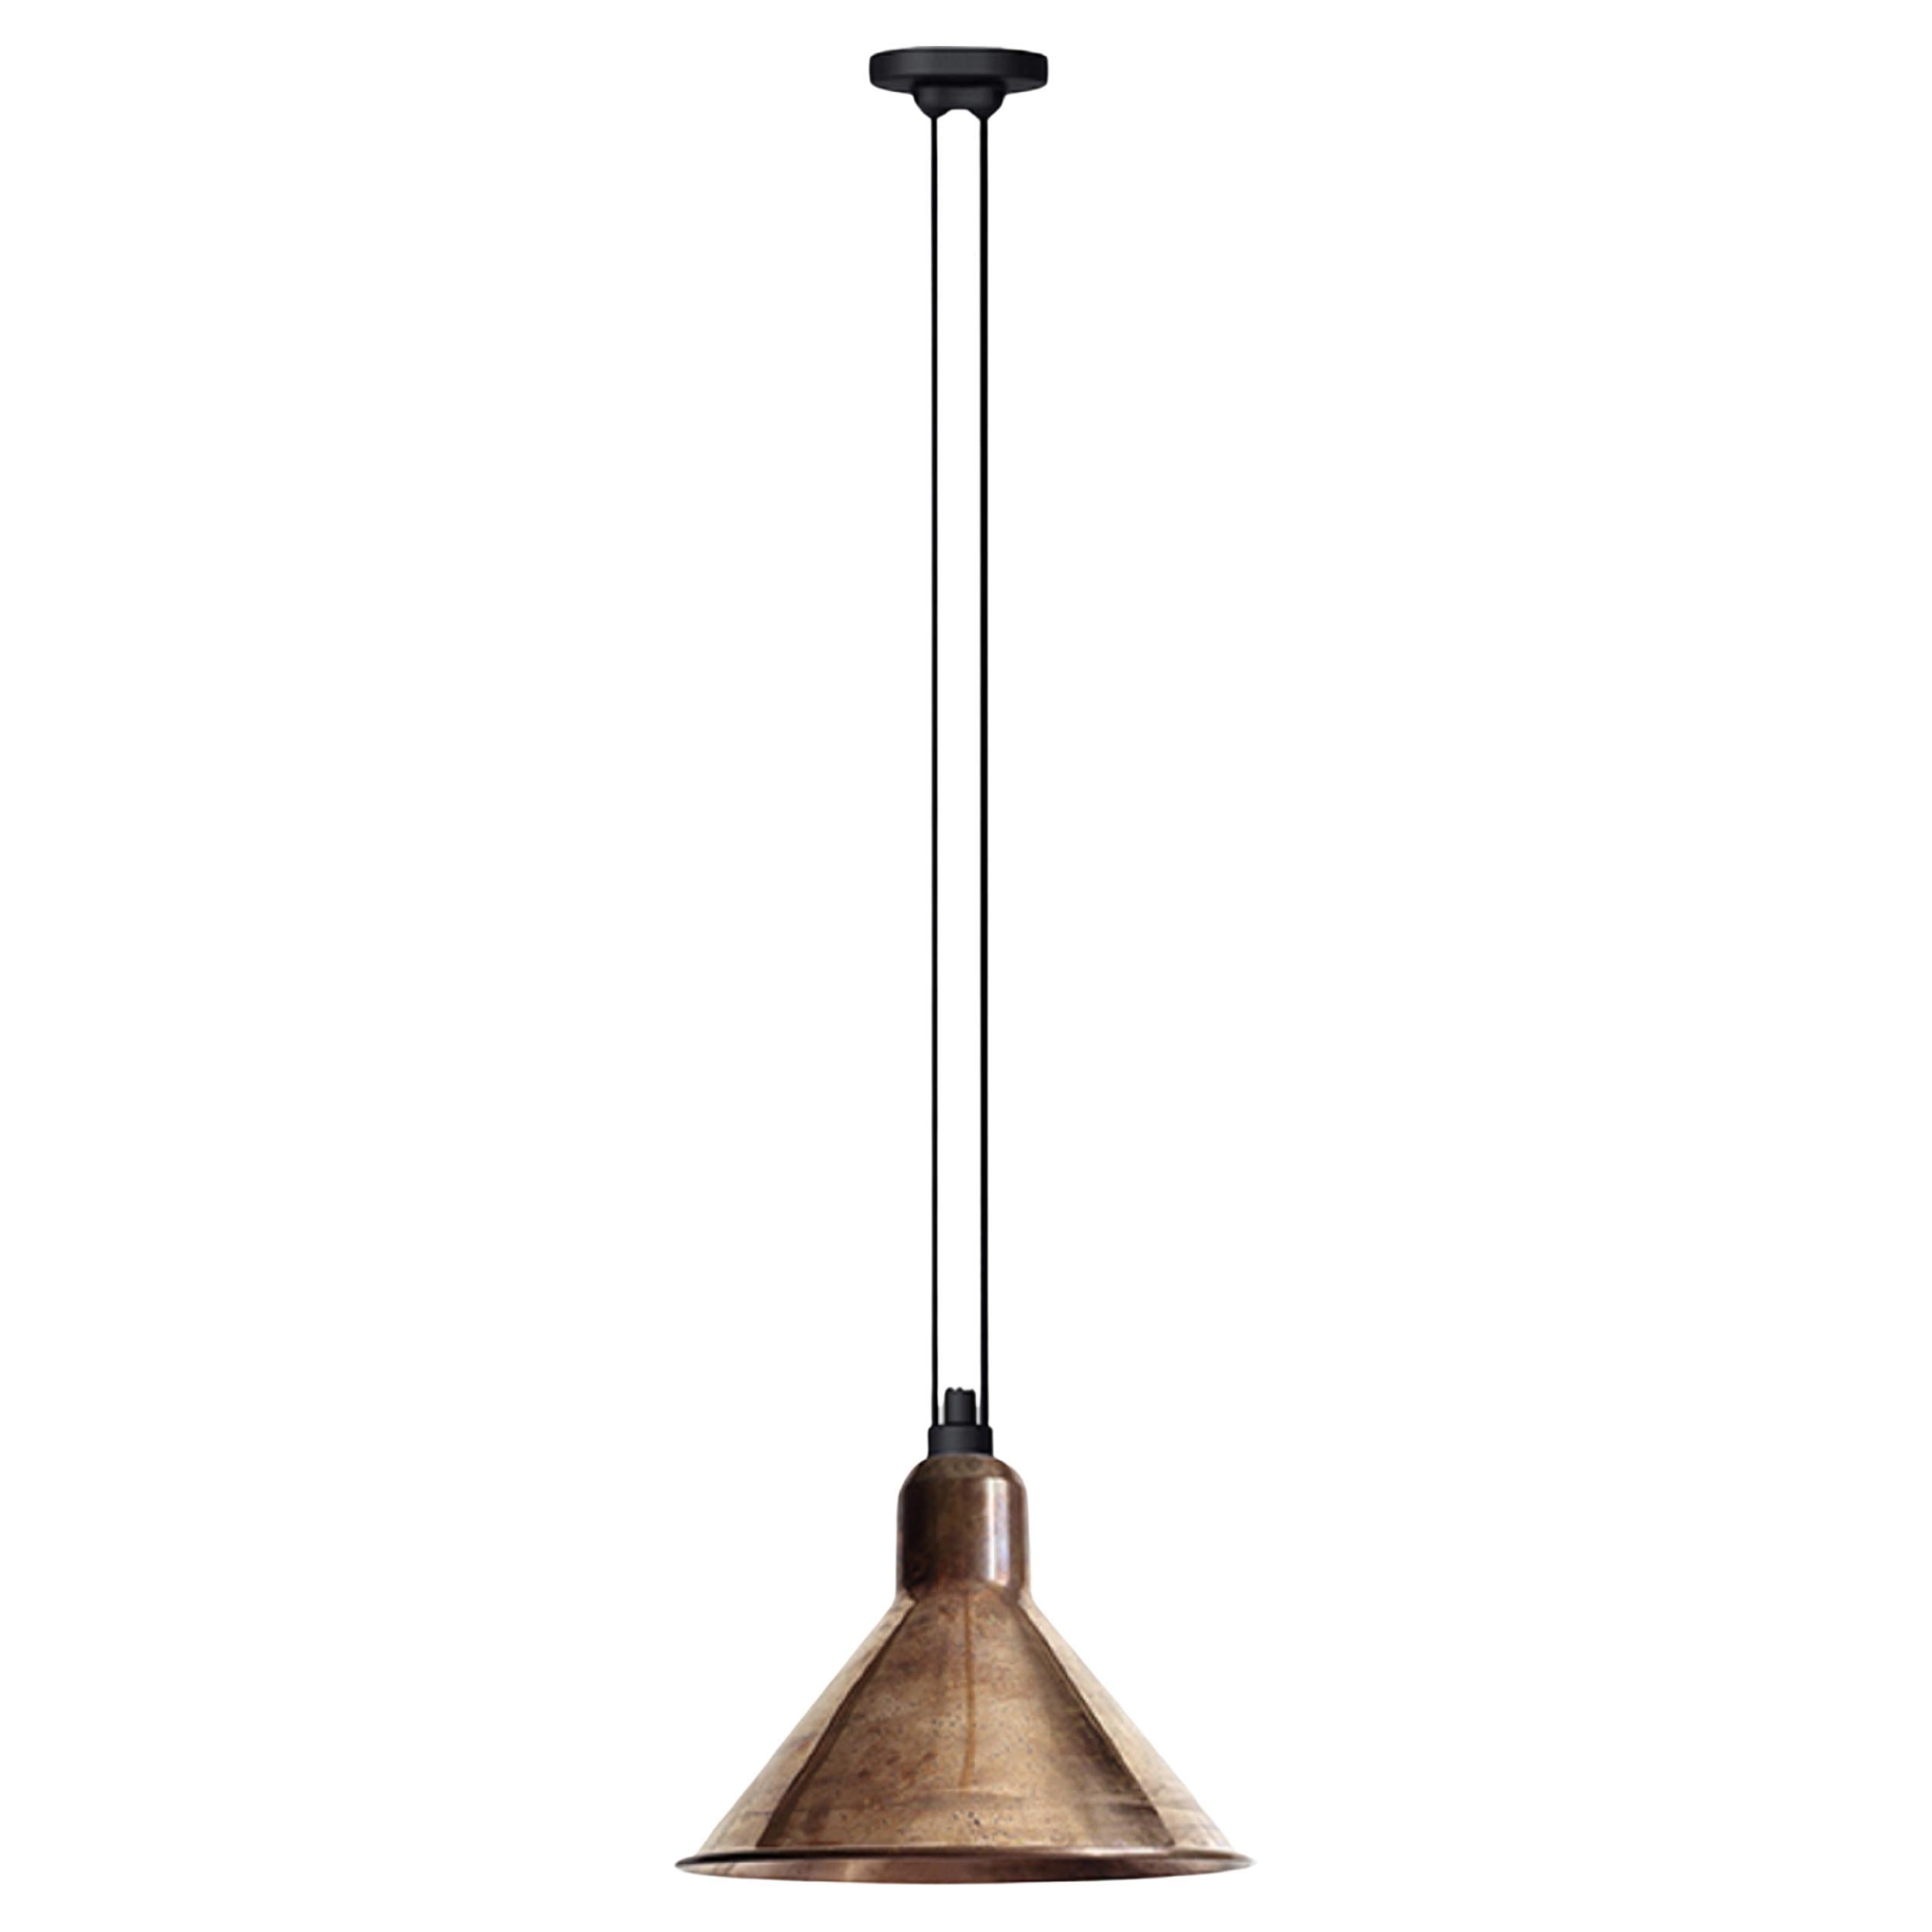 DCW Editions Les Acrobates N°322 XL Conic Pendant Lamp in Raw Copper Shade